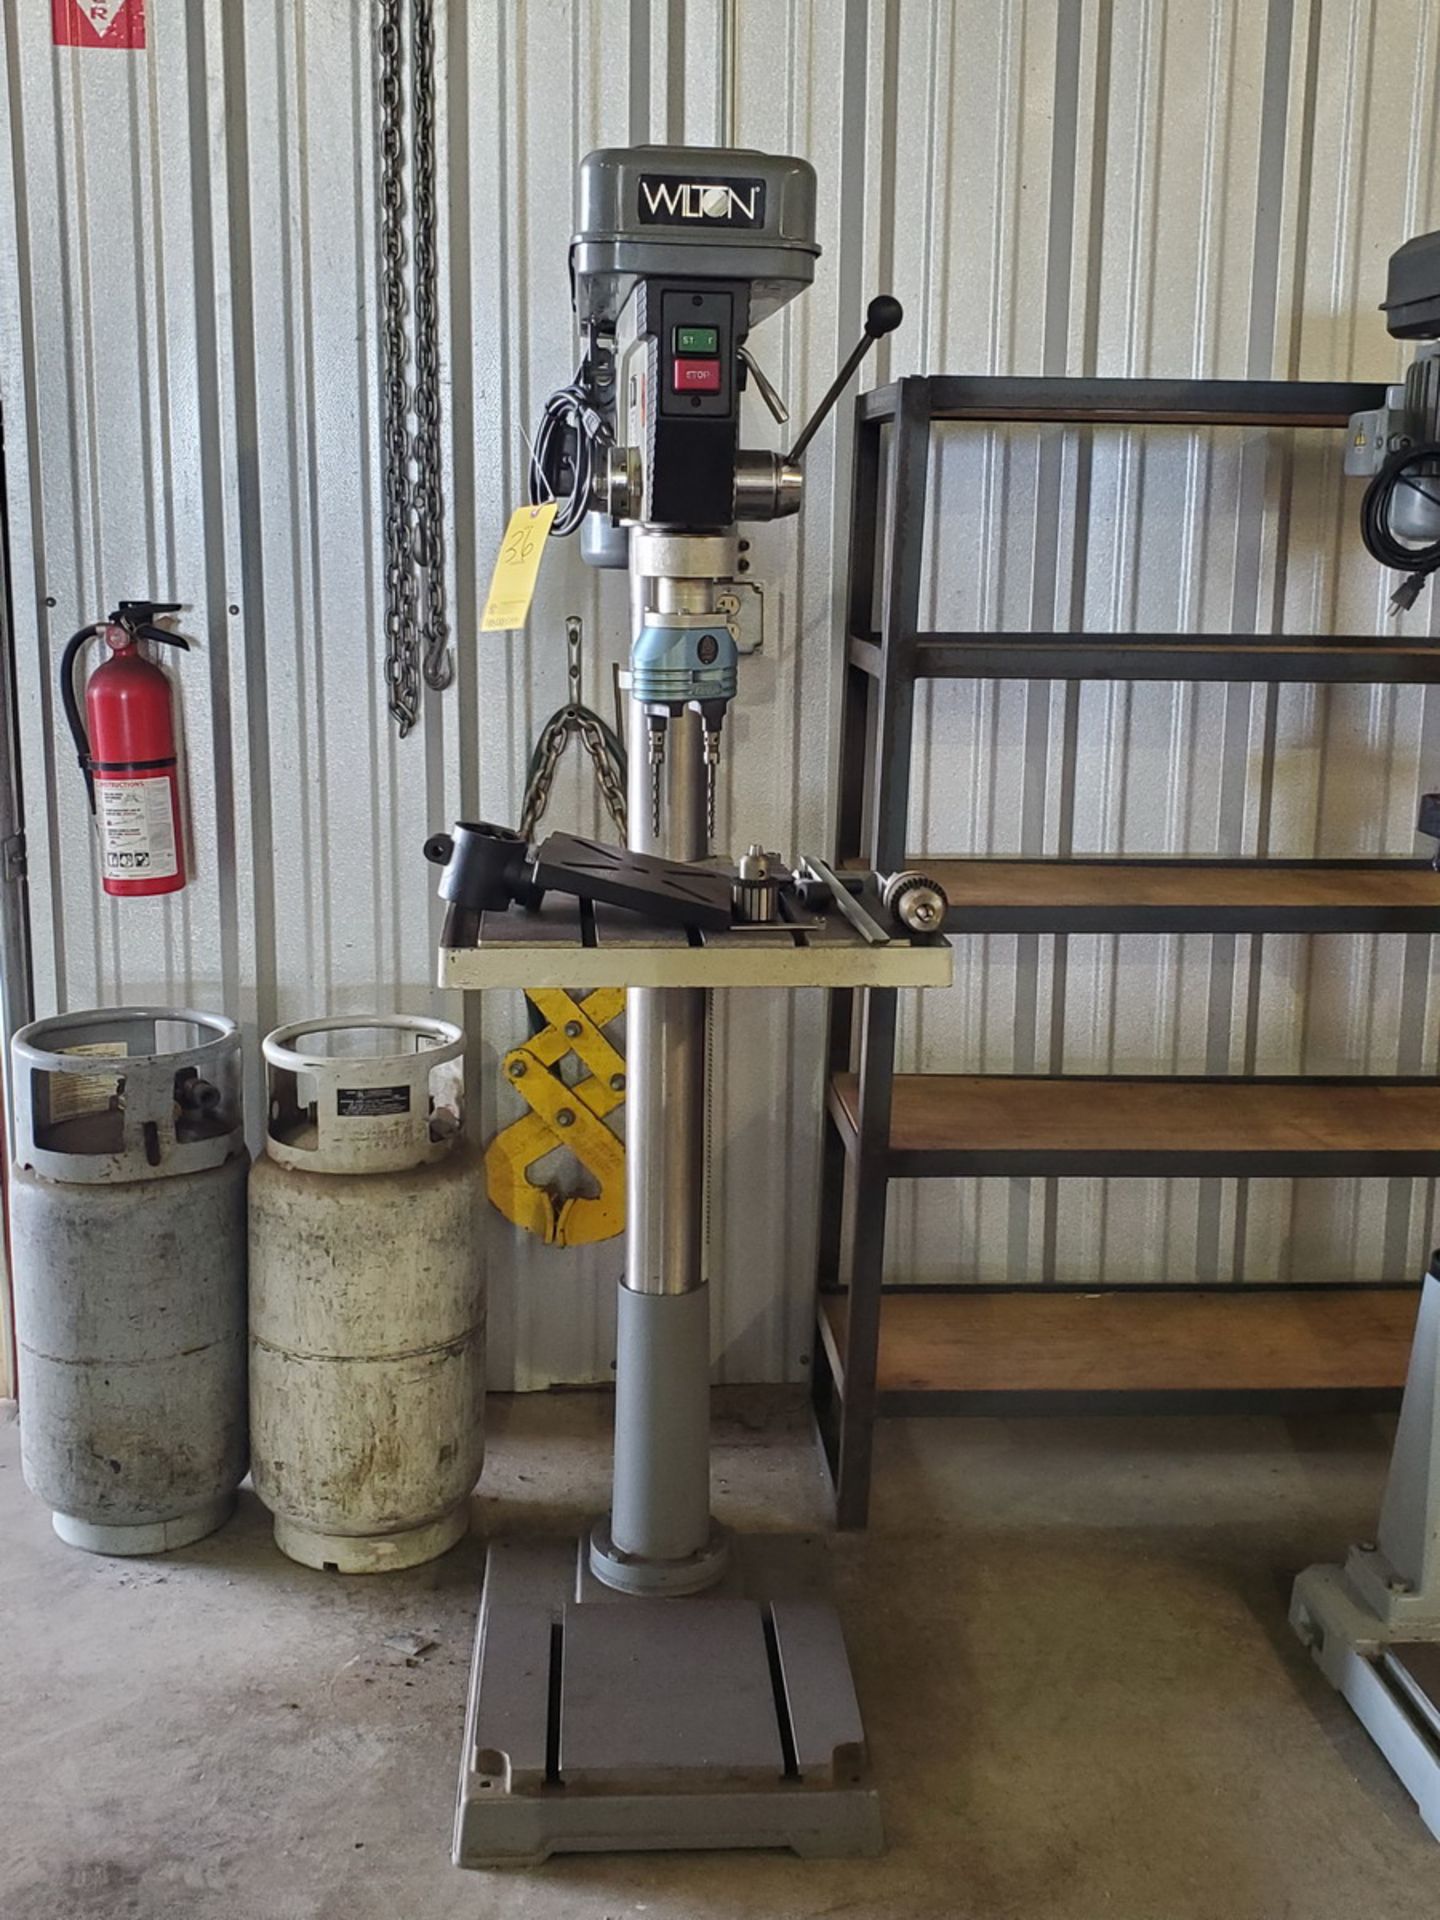 Wilton 2550 20" Drill Press 18"x16" Slotted Table, W/ Twin Head Spindle Chuck; W/ Tooling